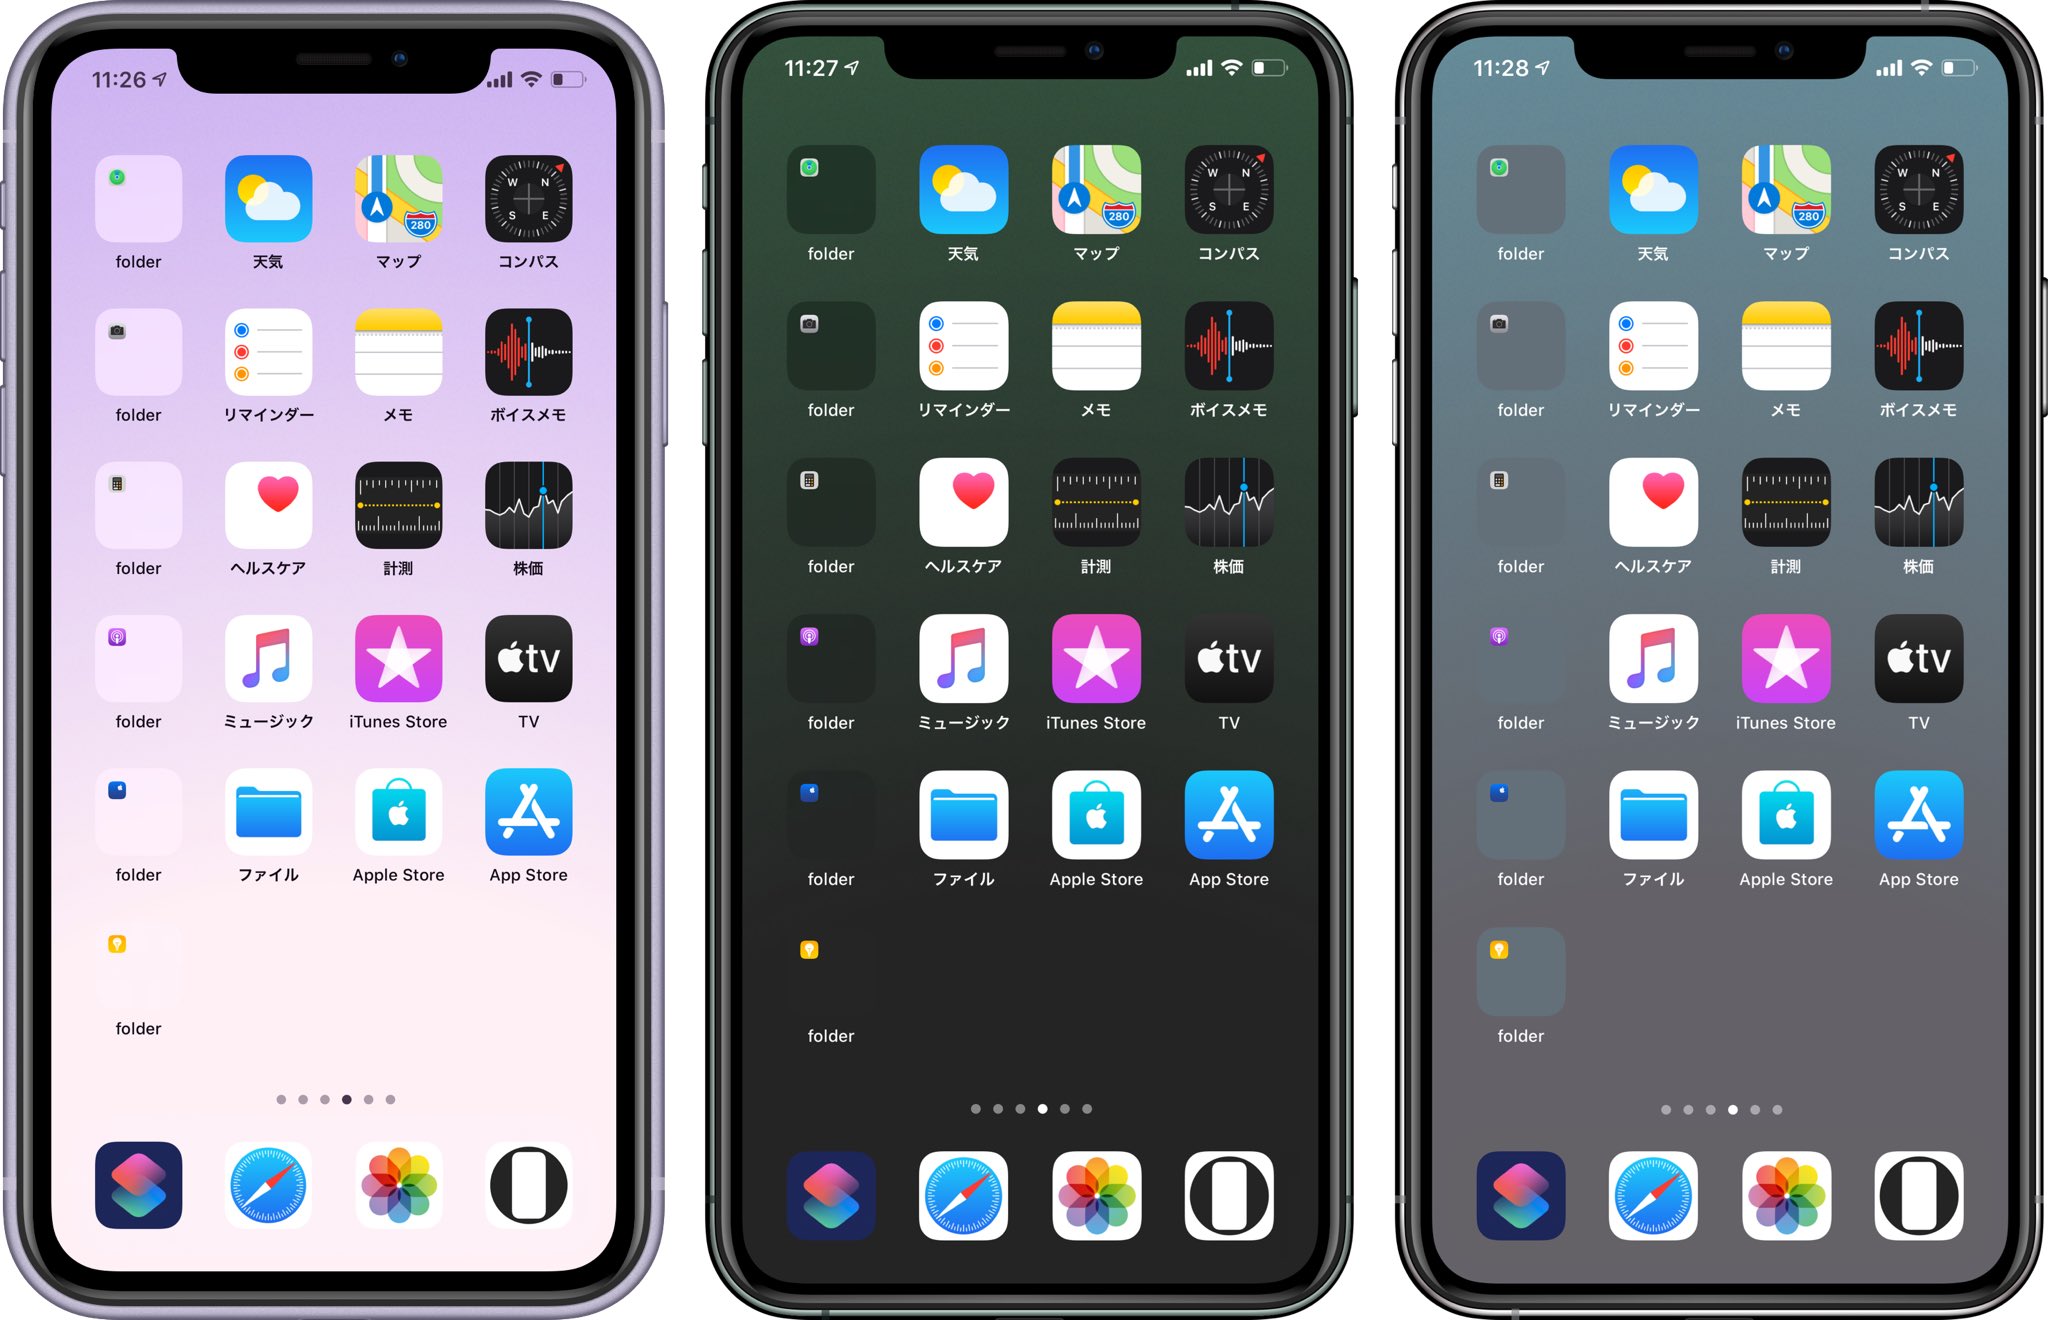 Hide Mysterious Iphone Wallpaper 不思議なiphone壁紙 Ios 13のiphone のドックを隠す繊細なグラデーションの壁紙各モード用各10枚 Wallpapers With Delicate Gradients That Hide The Ios 13 Iphone Dock 10 Sheets For Each Mode T Co